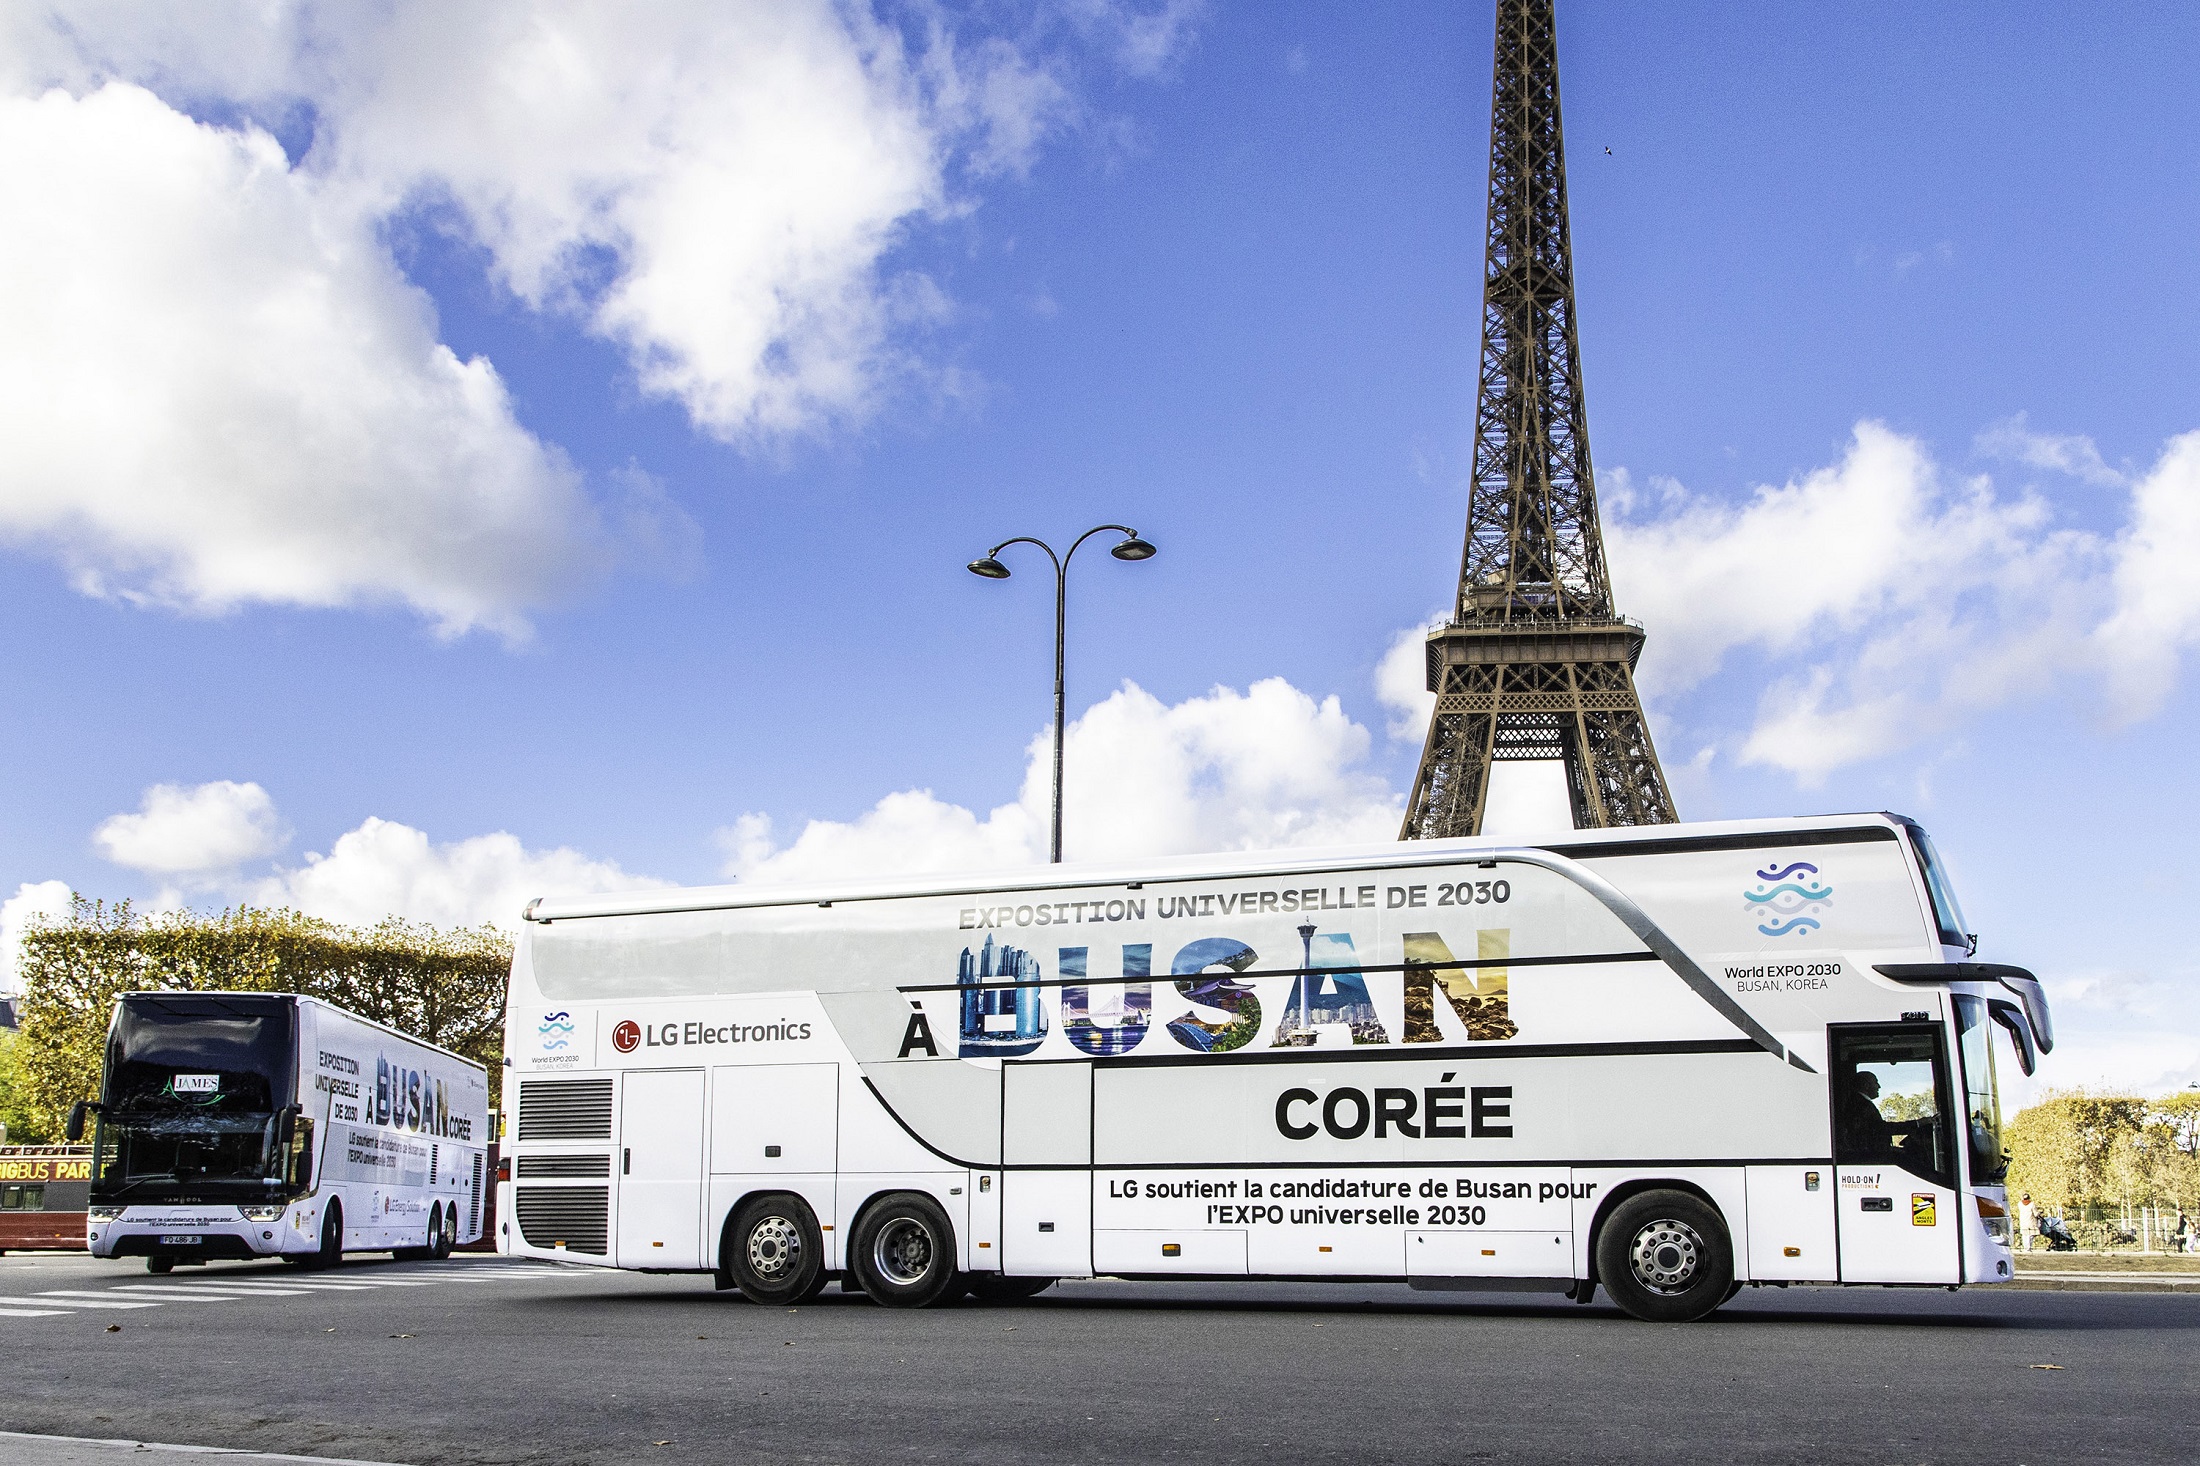 A photo of a big LG bus with the words 'A Busan Coree' passing by the Eiffel Tower